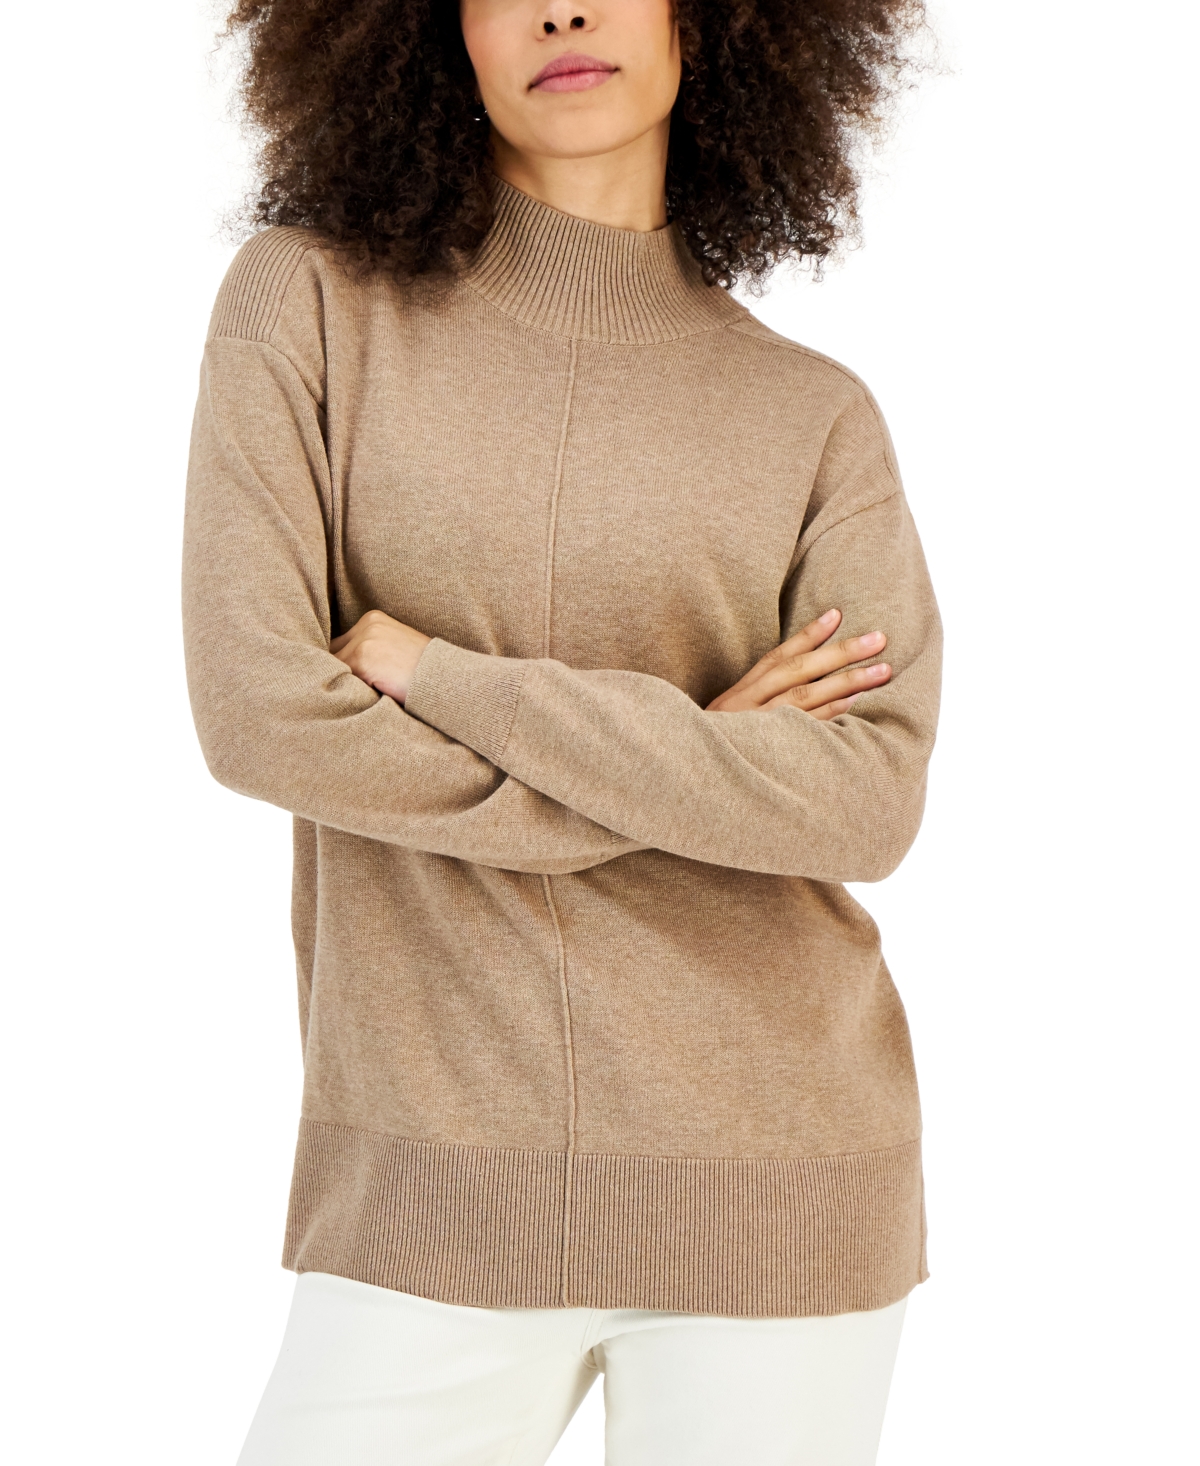 Women's Cotton Seam-Front Mock Neck Sweater, Created for Macy's - Chestnut Heather